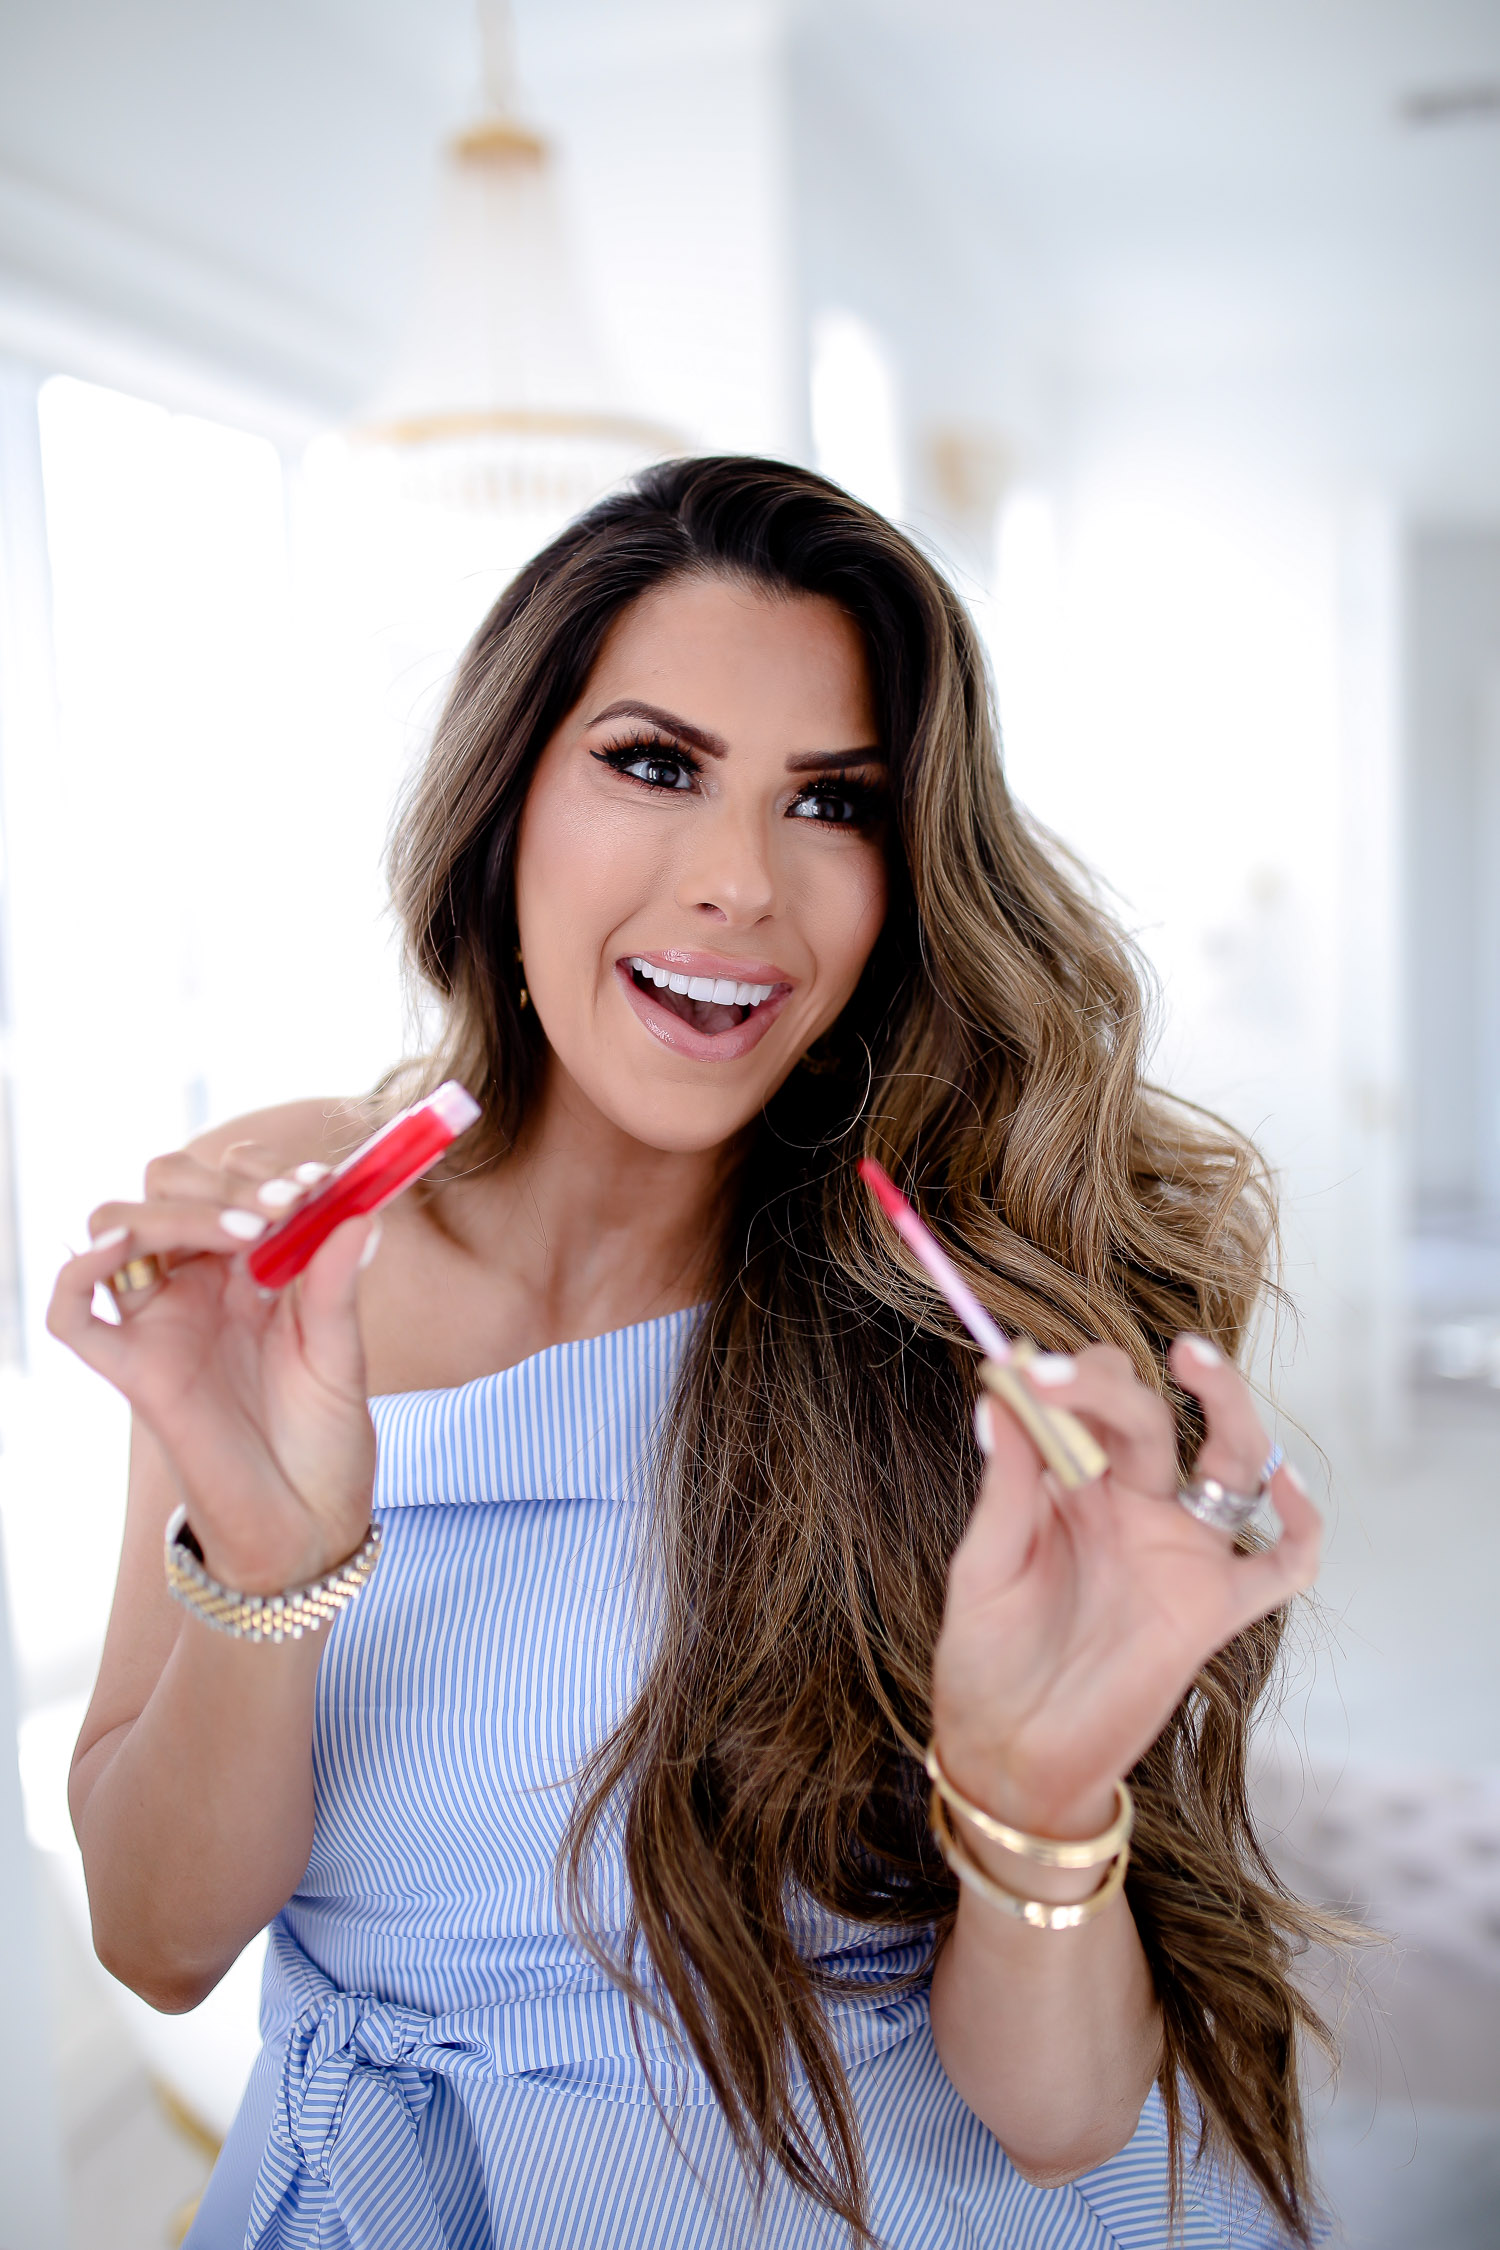 Too Faced Lip Injections Gloss by popular US beauty blog, The Sweetest Thing: image of a woman sitting in her bathroom and holding a Too Faced Lip Injections Gloss in her hands. 